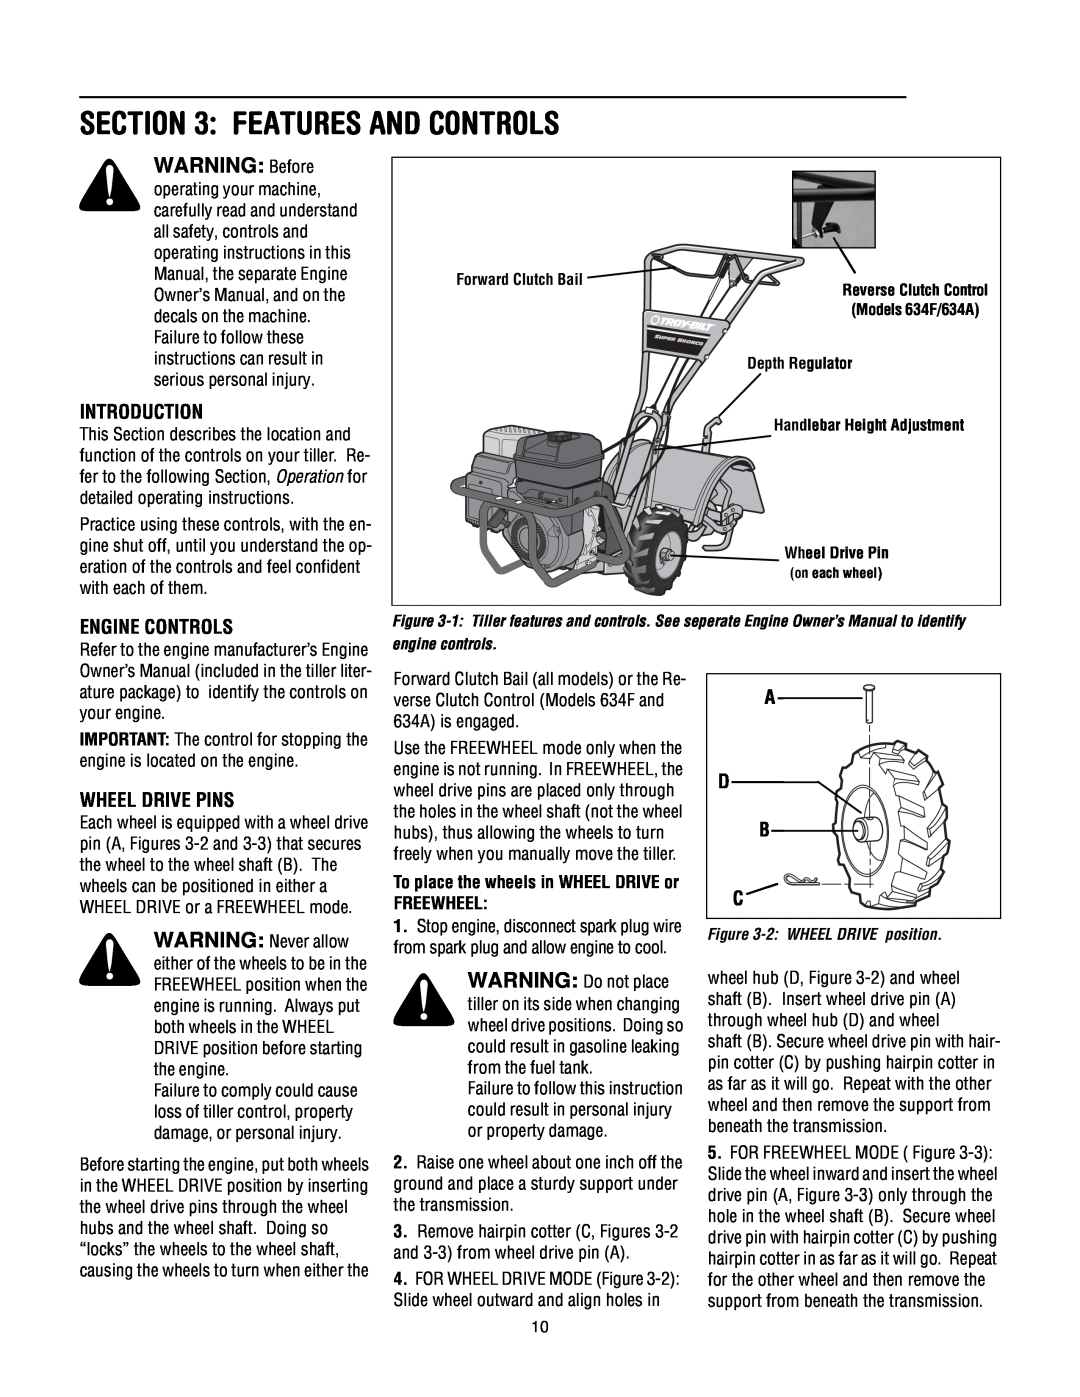 Troy-Bilt 630C-Tuffy manual Features And Controls, WARNING Before, Introduction, Engine Controls, Wheel Drive Pins, A D B C 